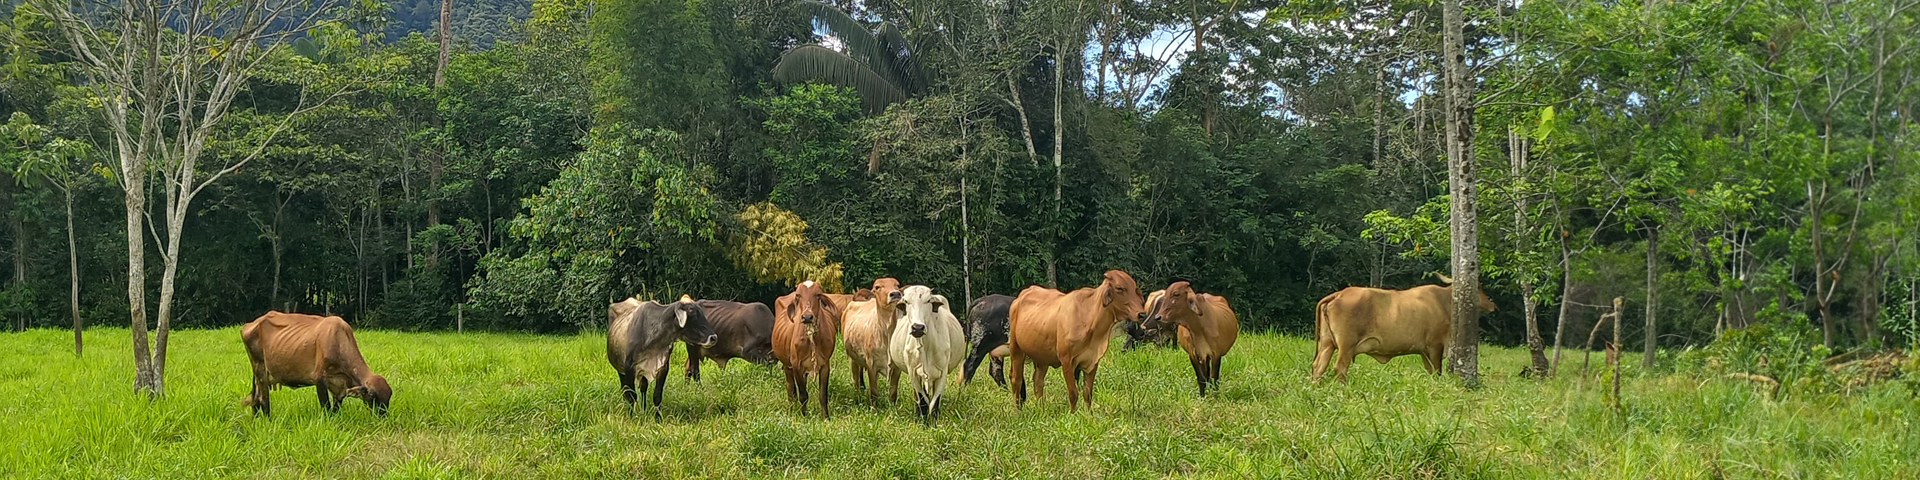 Cattle graze on a green pasture by a neighbouring forest